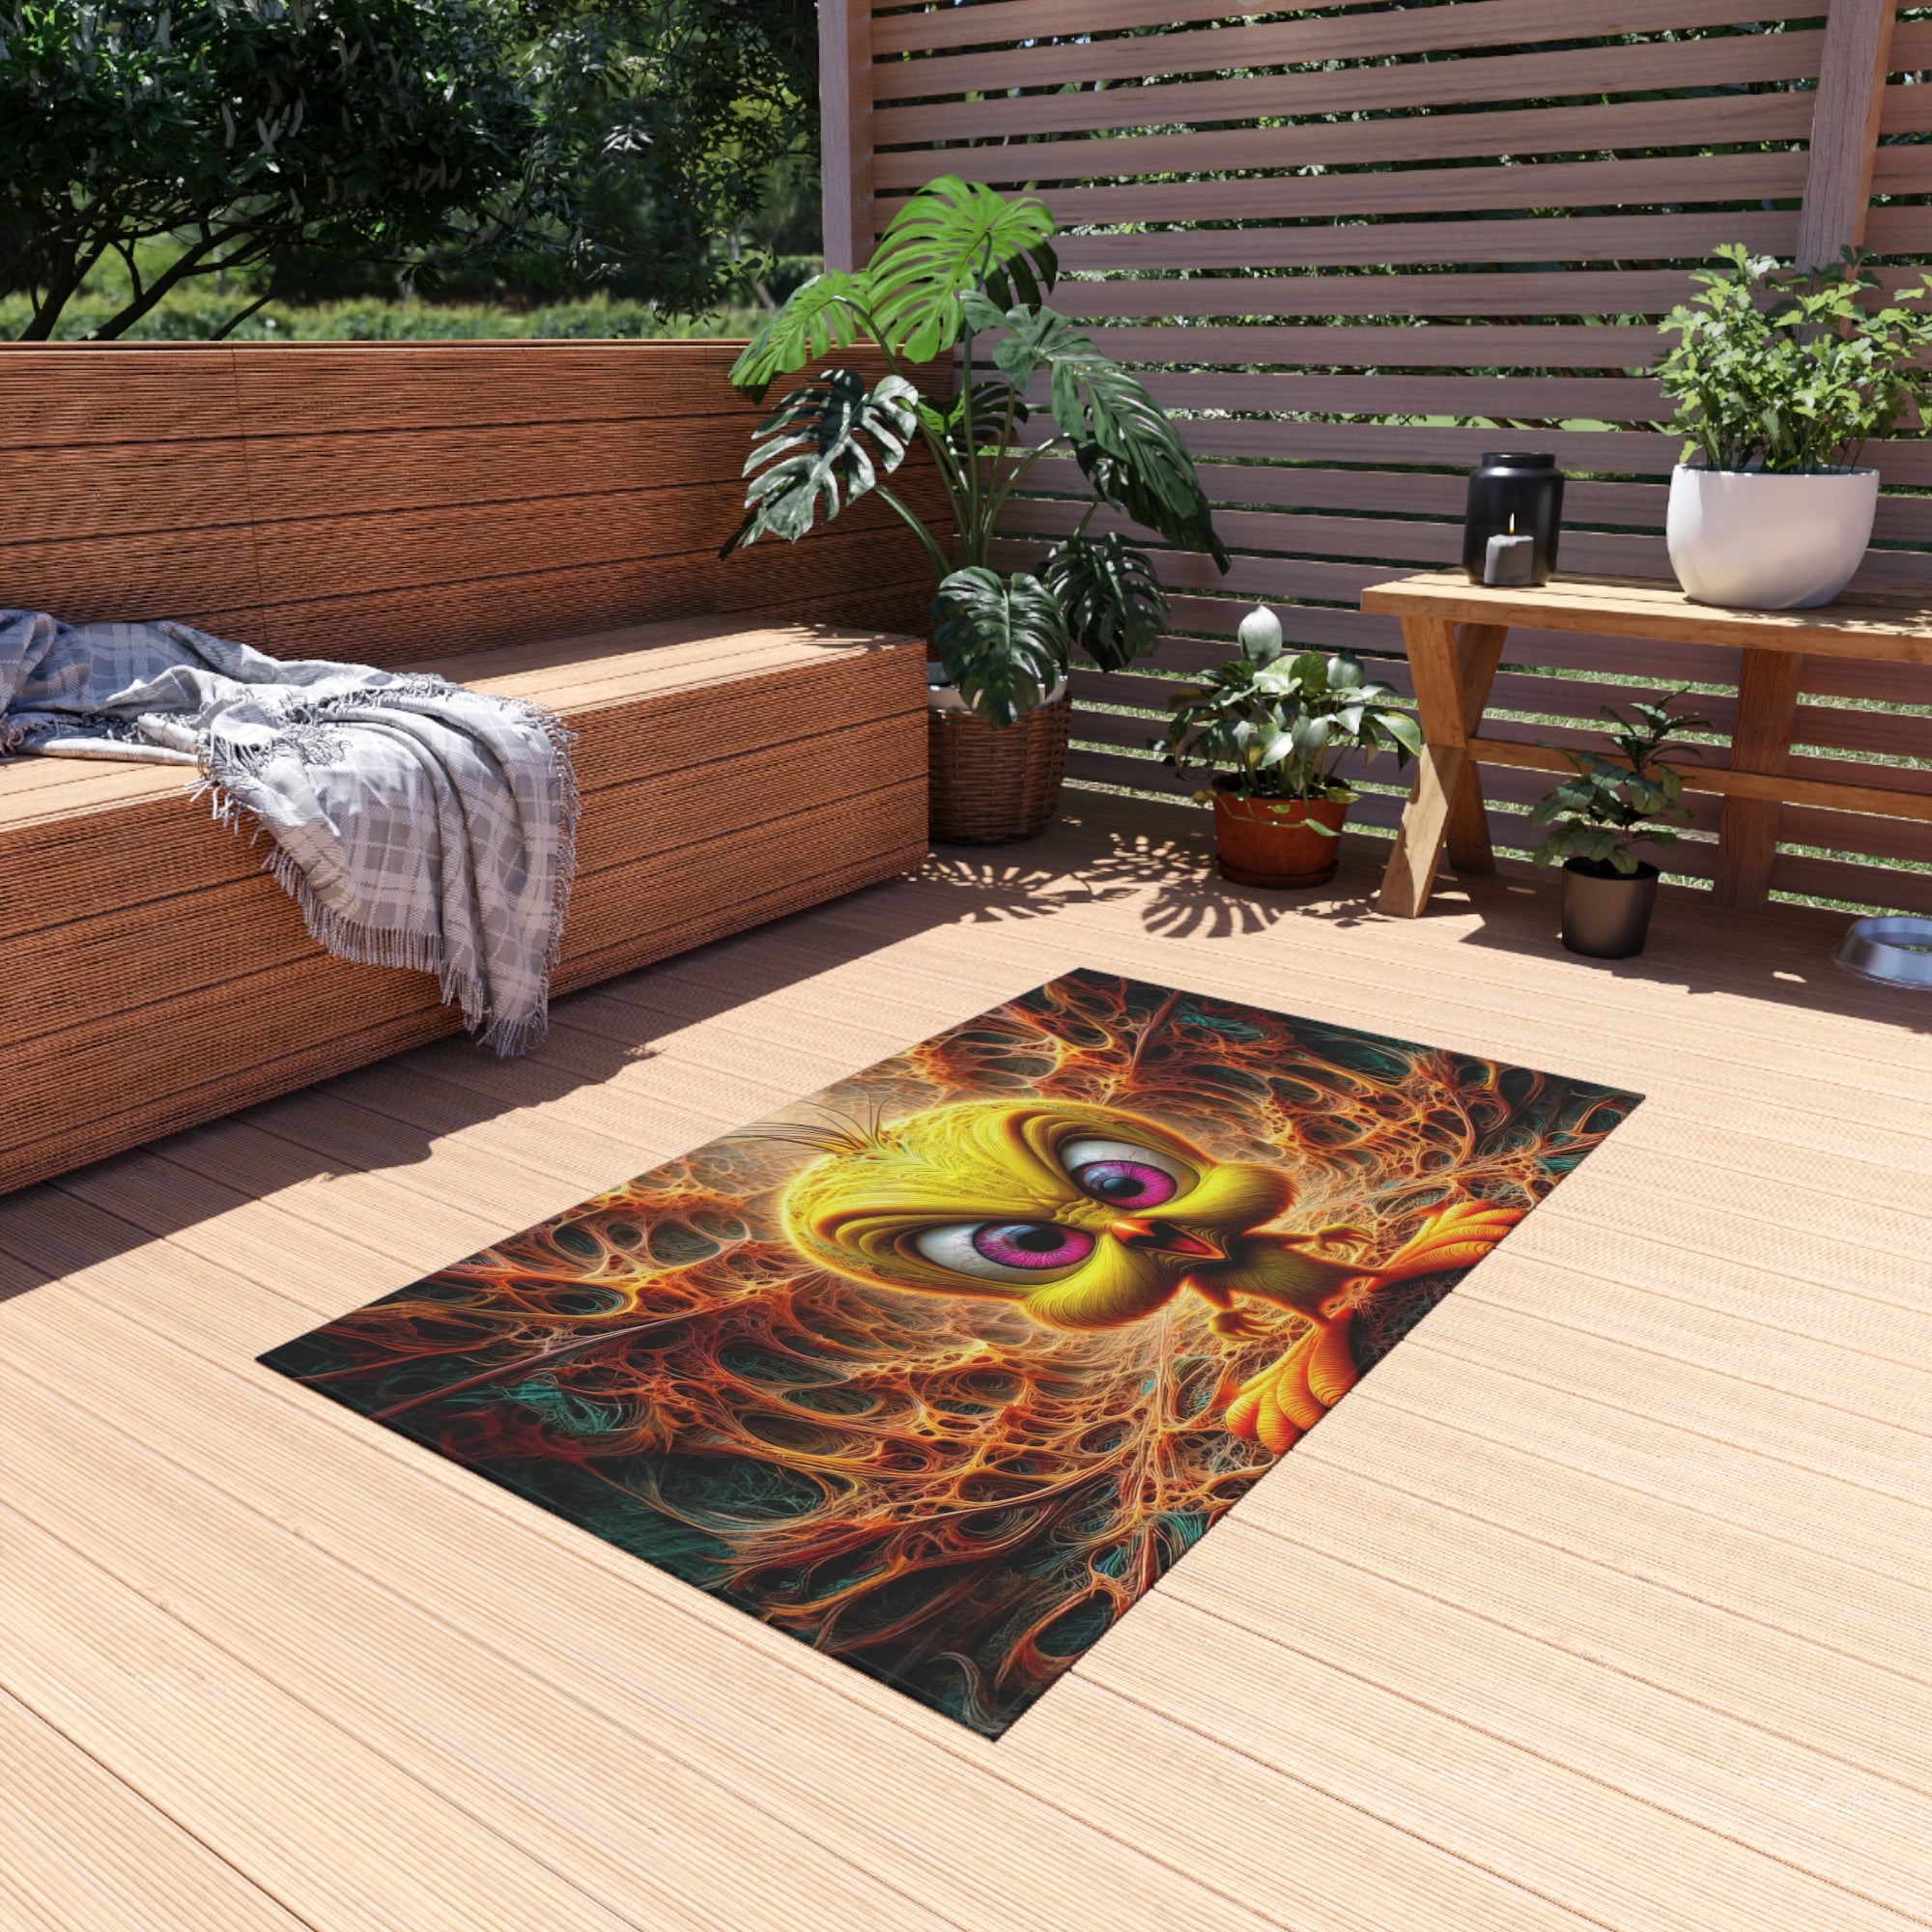 The Malevolent Mirth of Twisted Tweety Outdoor Rug